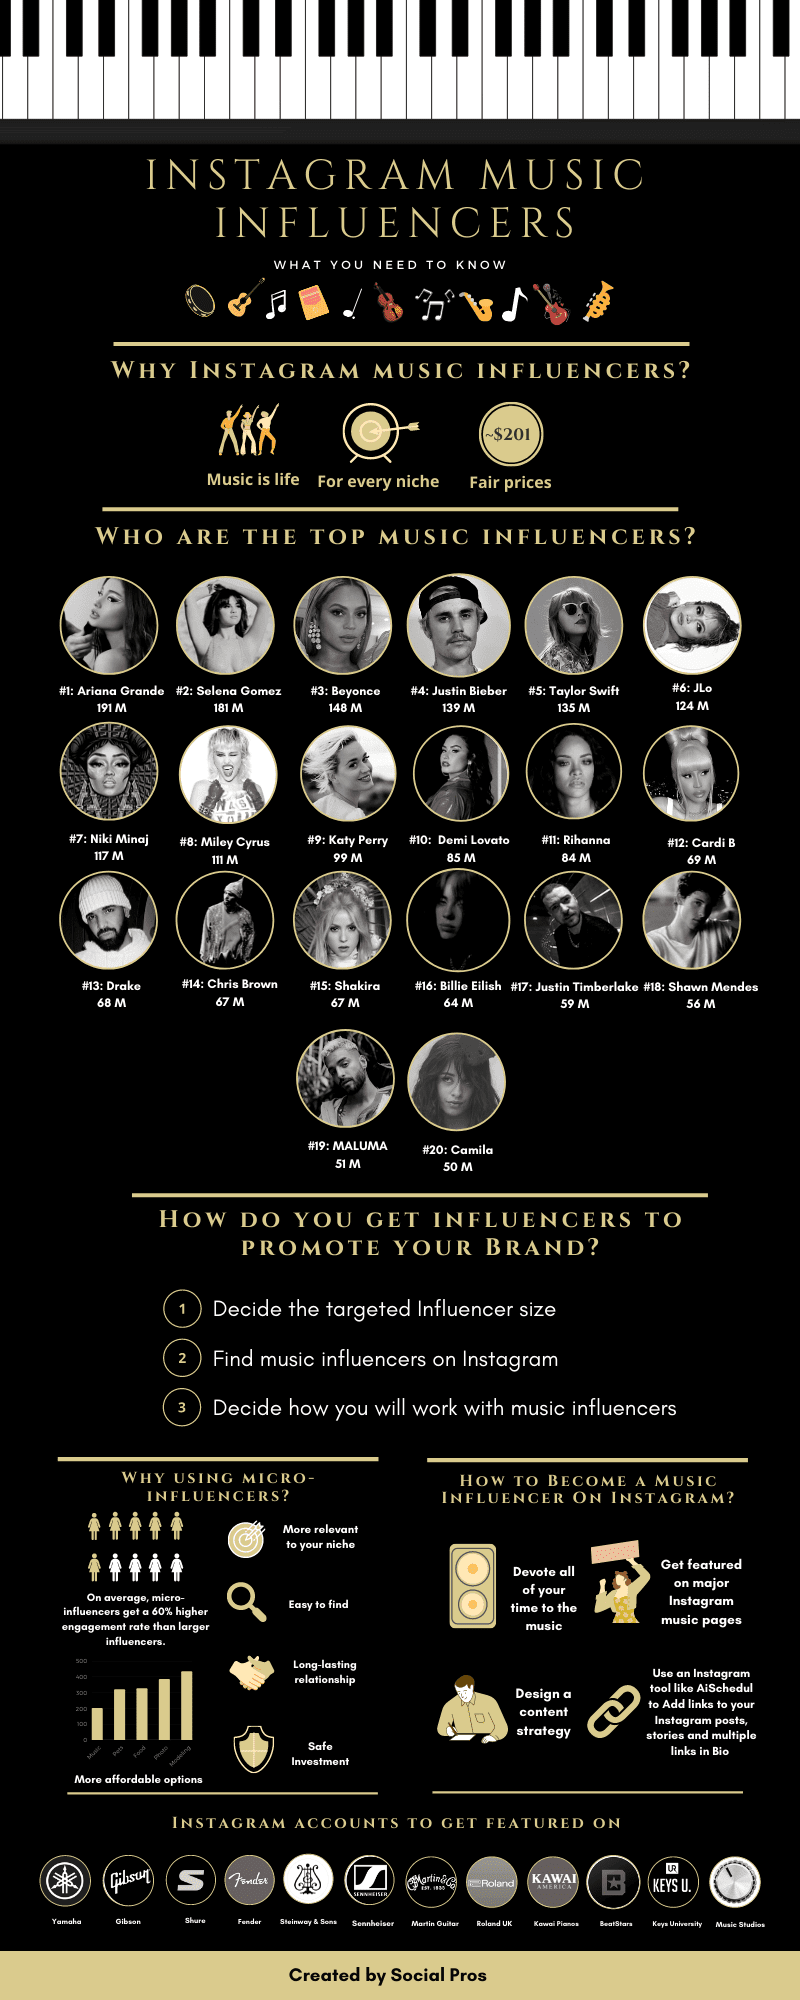 Music Influencers on Instagram infographic